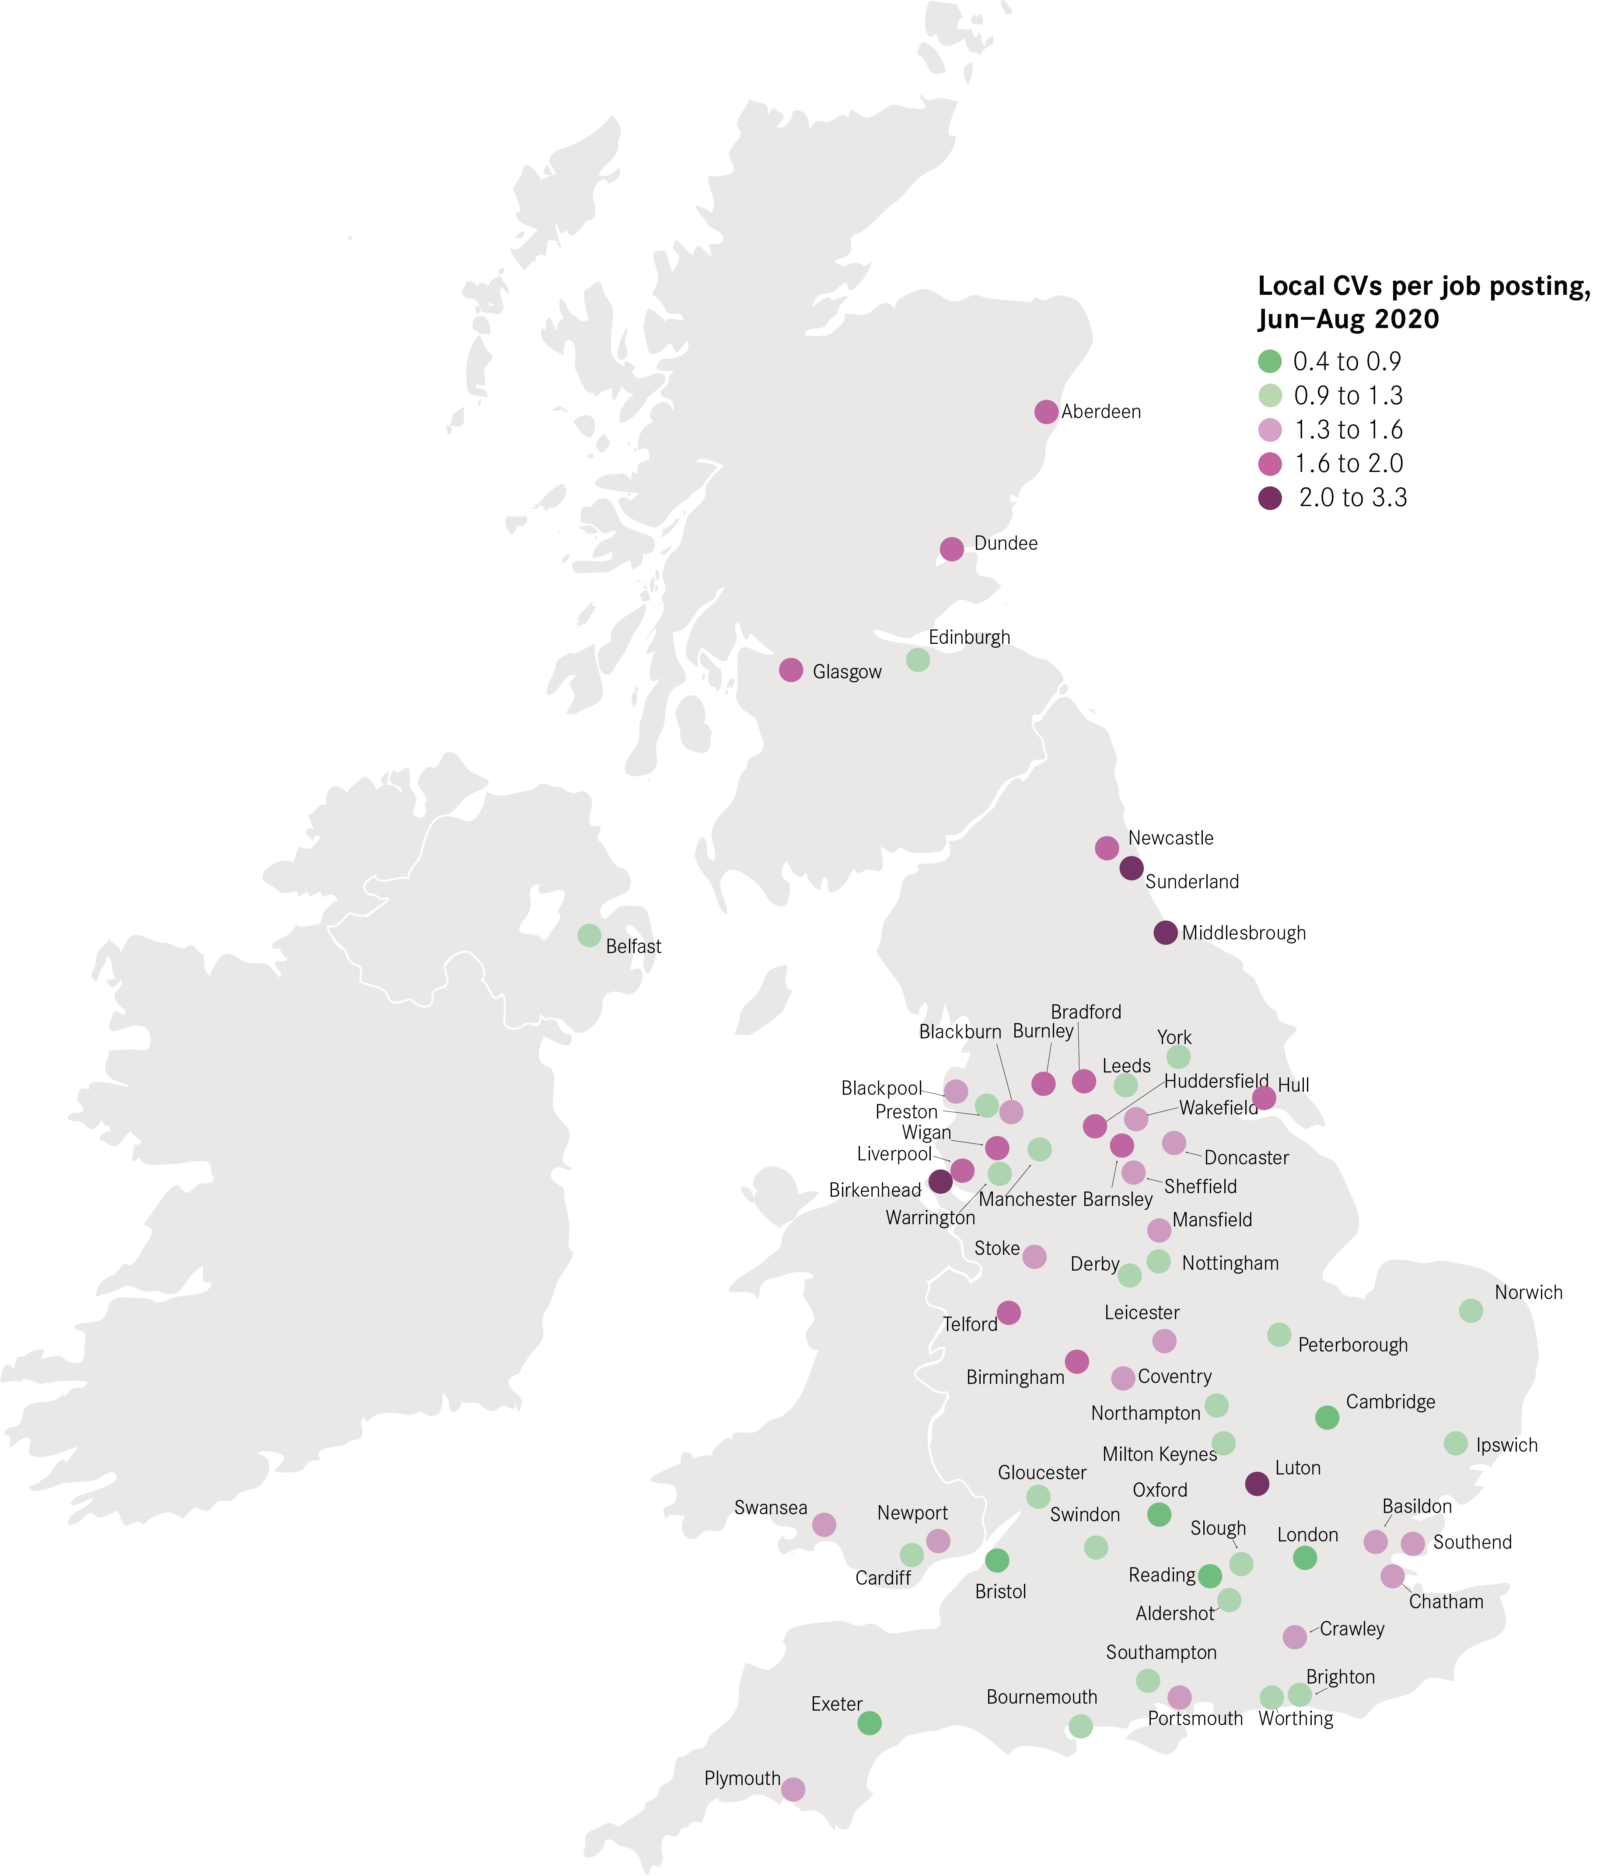 Looking for Work Outside London? Manchester Has Higher Jobs Rate